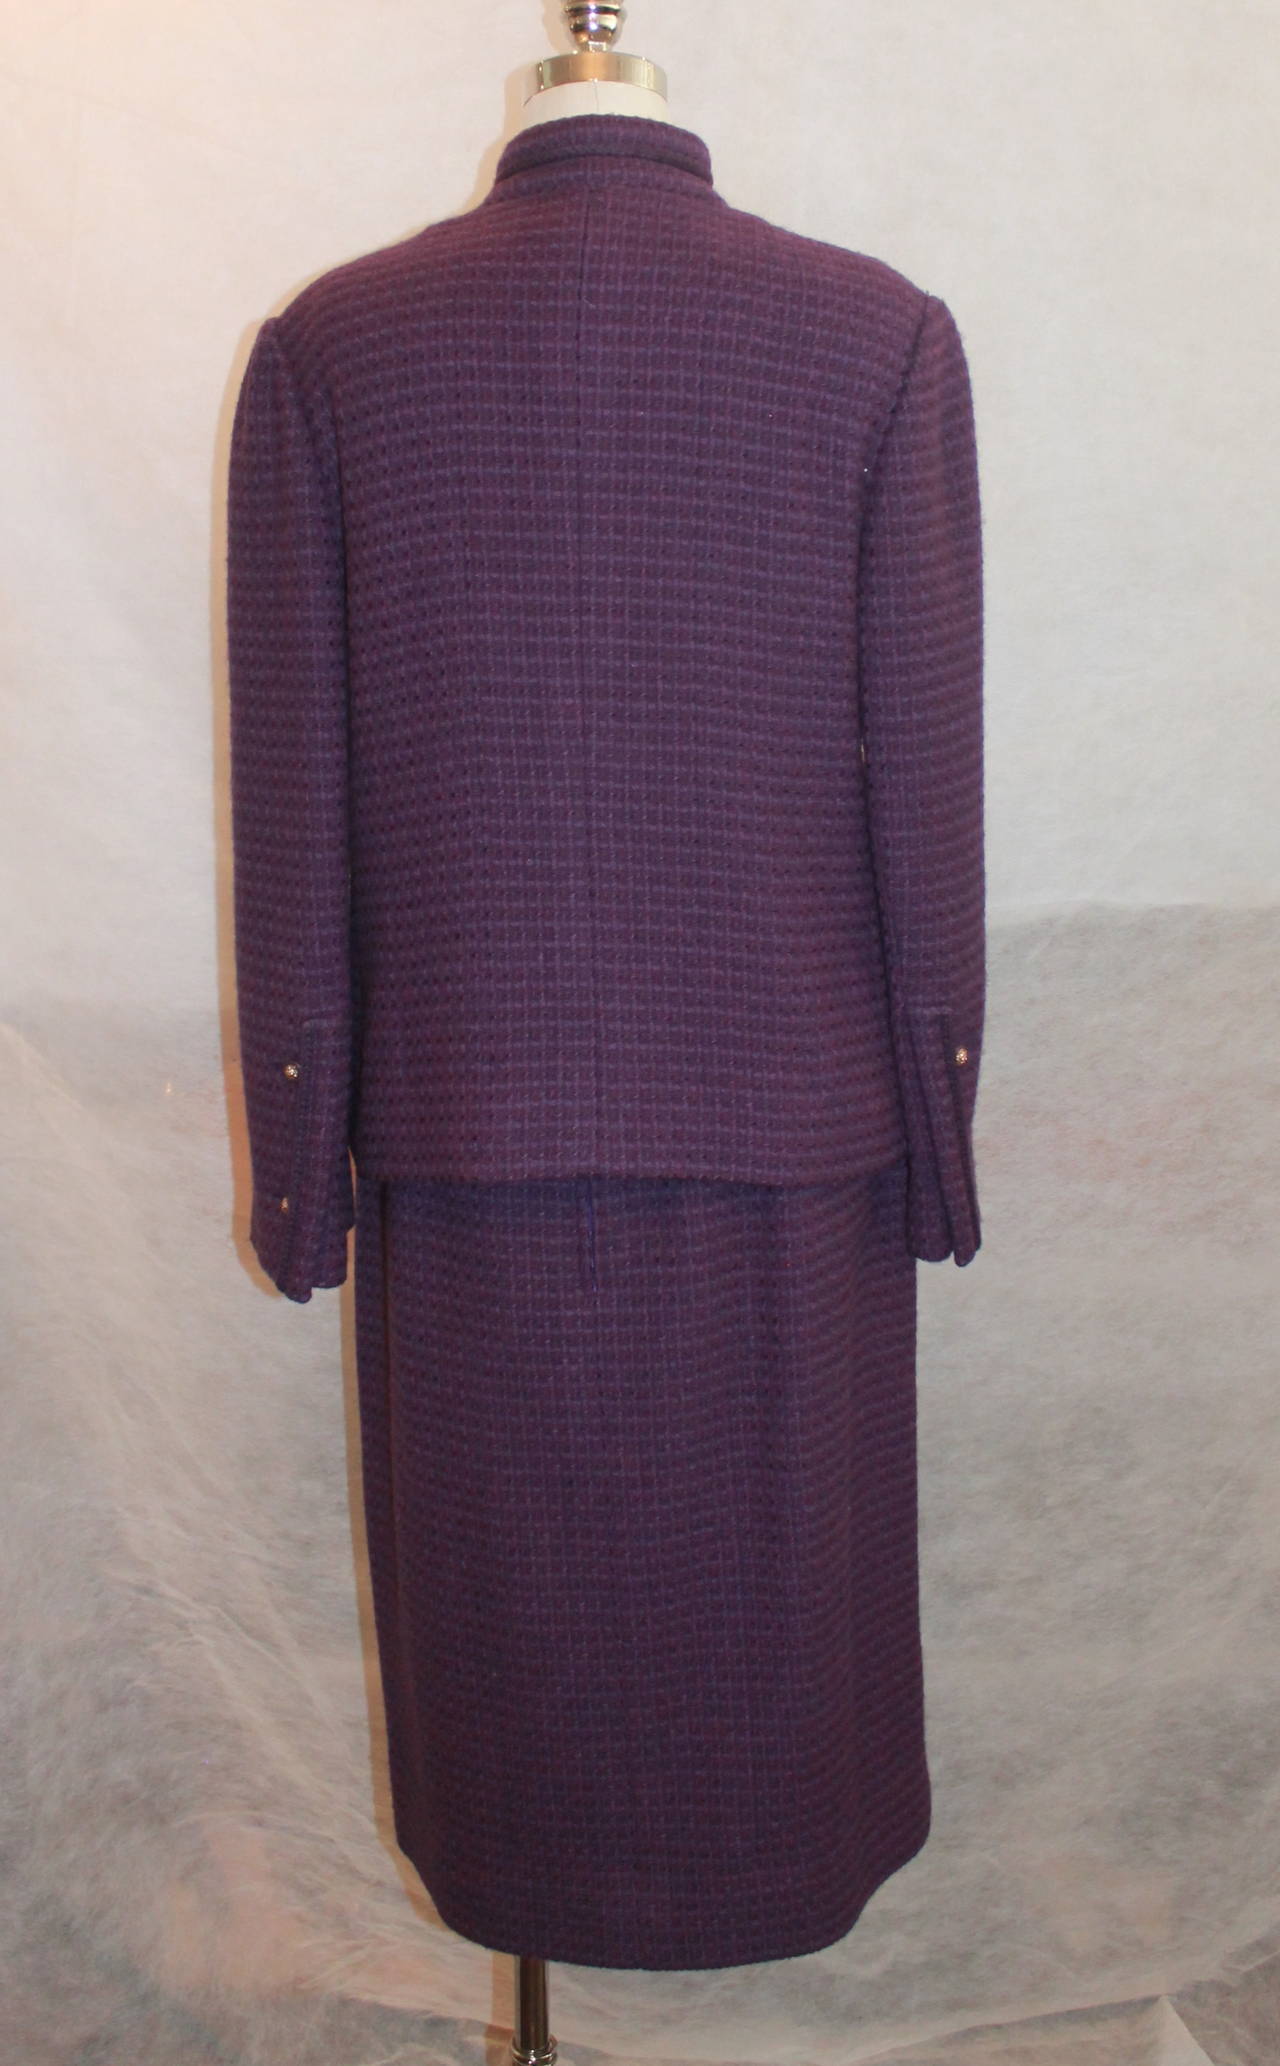 Chanel 1970's Vintage Purple Tweed Wool Skirt Suit - 44 In Good Condition For Sale In West Palm Beach, FL